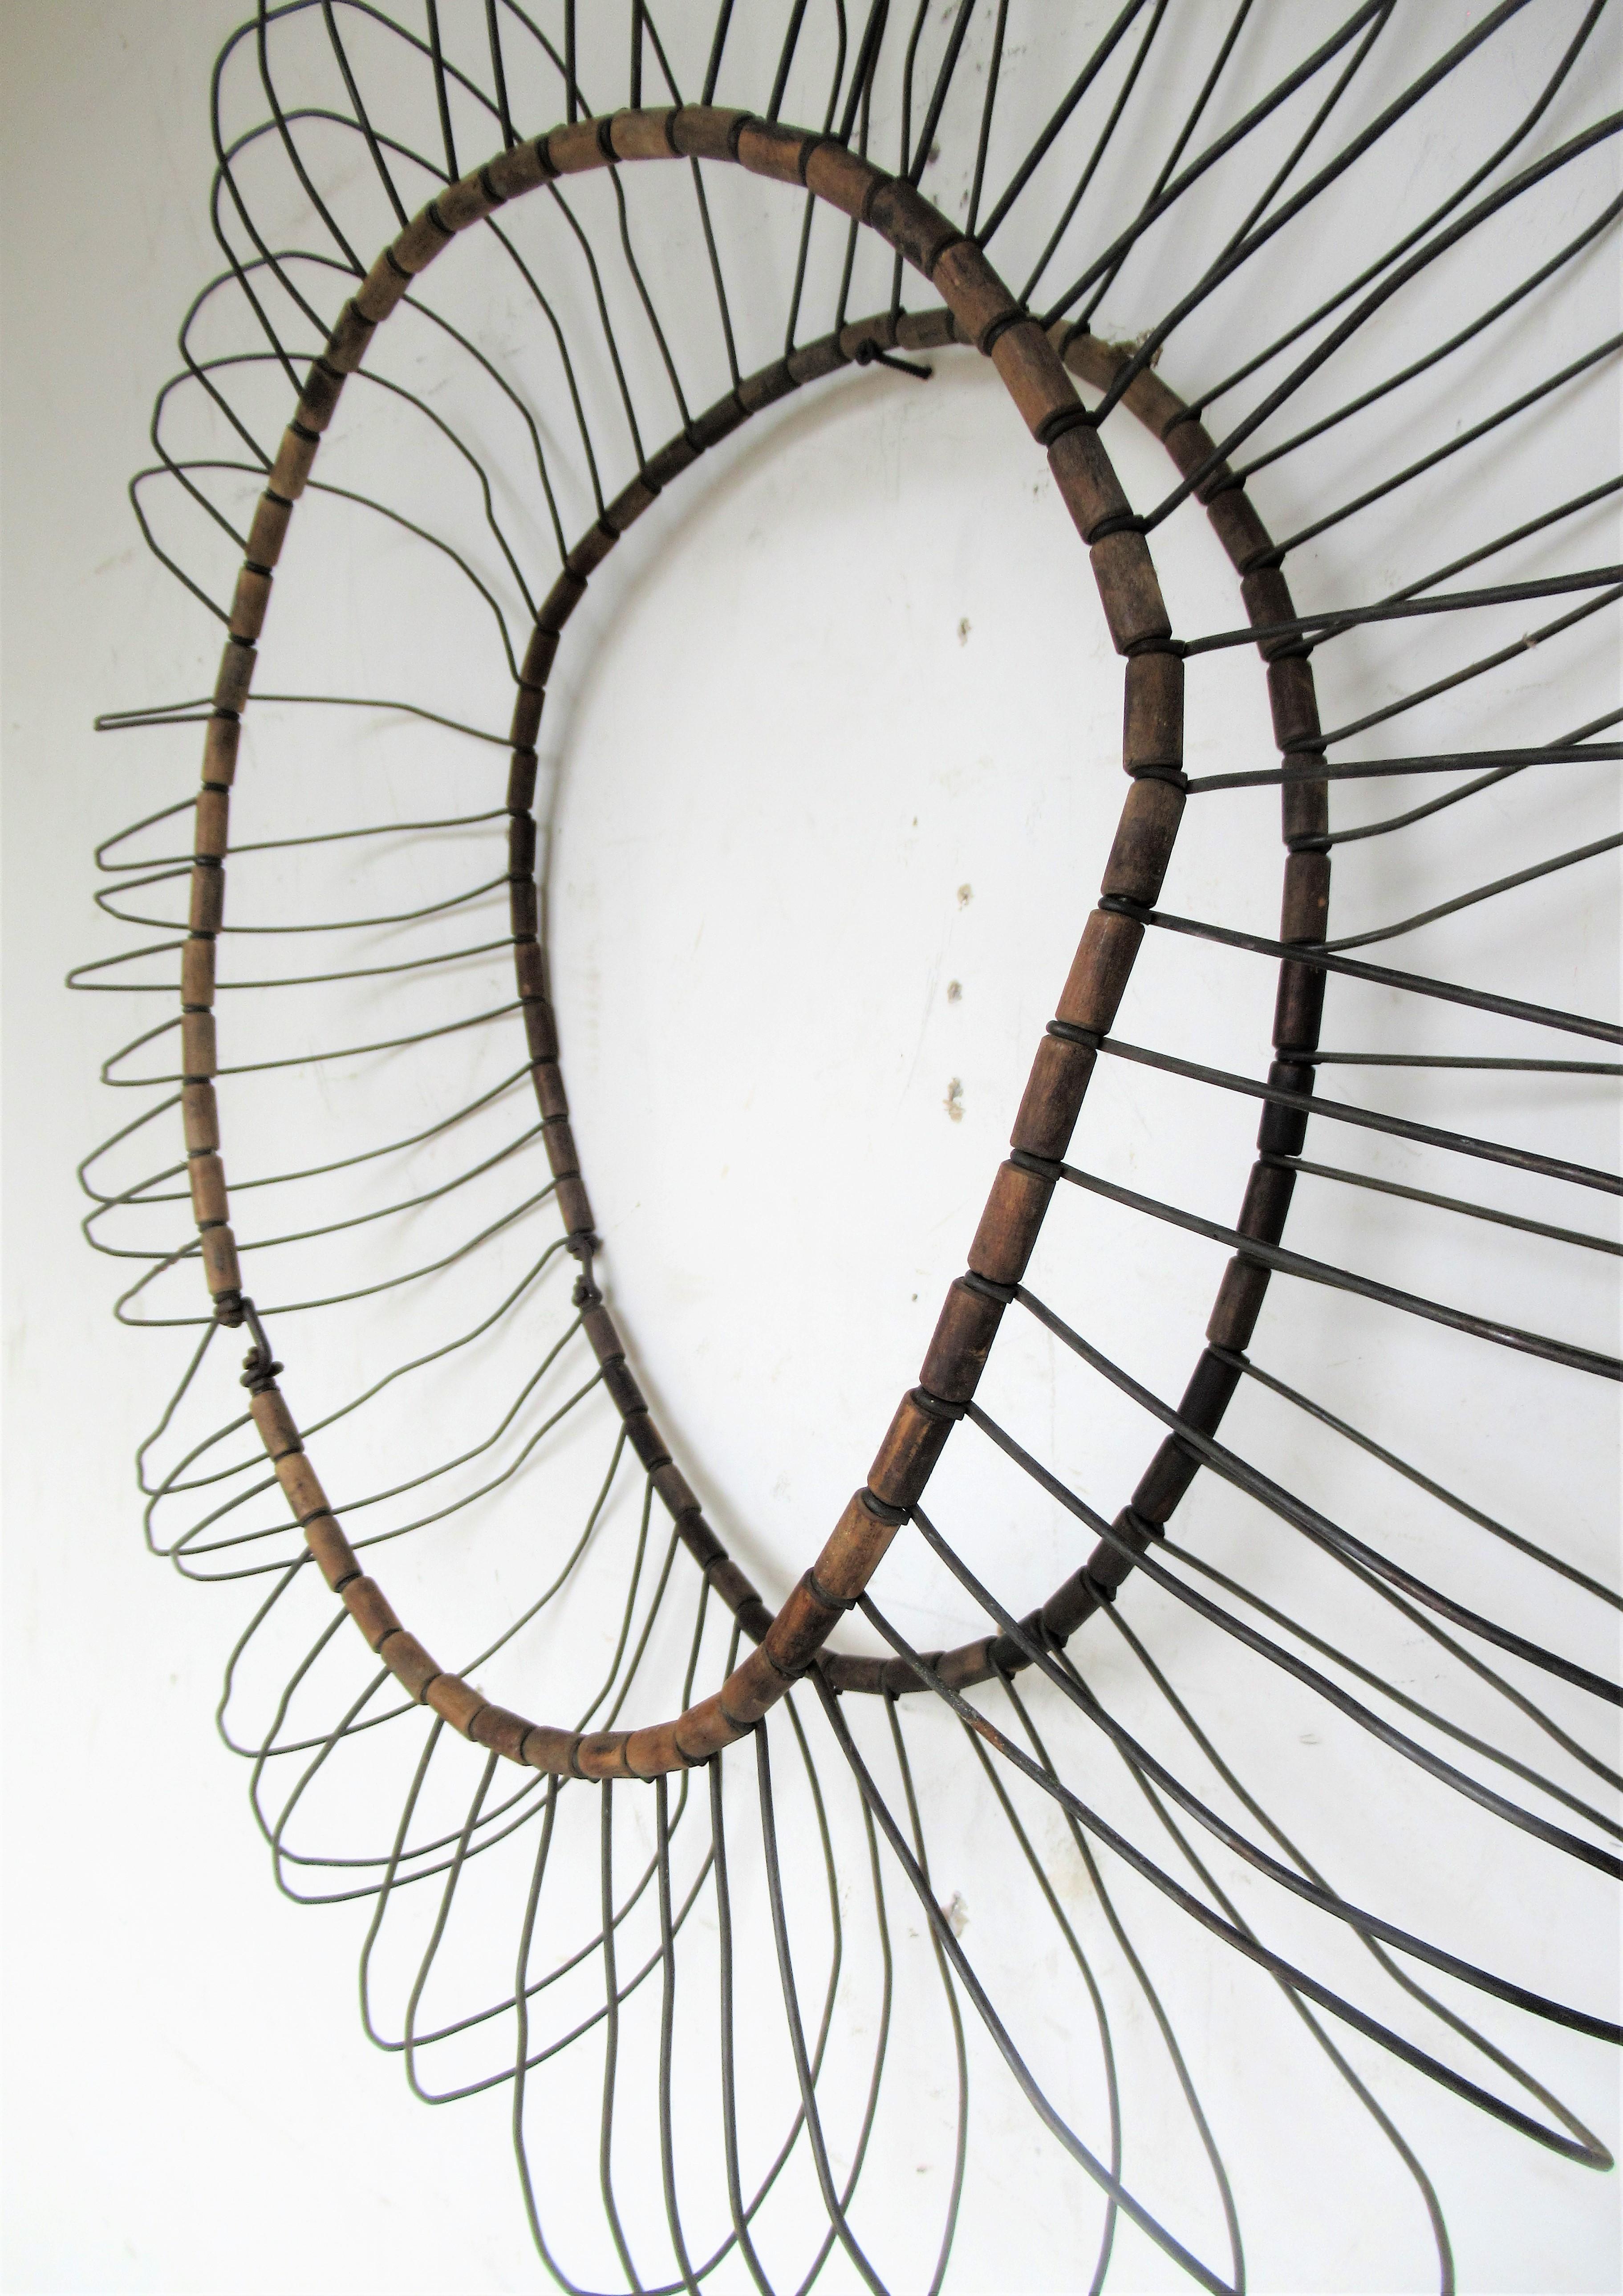 Three dimensional antique wire and cylindrical wood links large sunburst / flower petal form with great sculptural quality. Initial use was a cage to hold an old inner tube for a tire.  Circa 1930. A great looking object to display as decorative